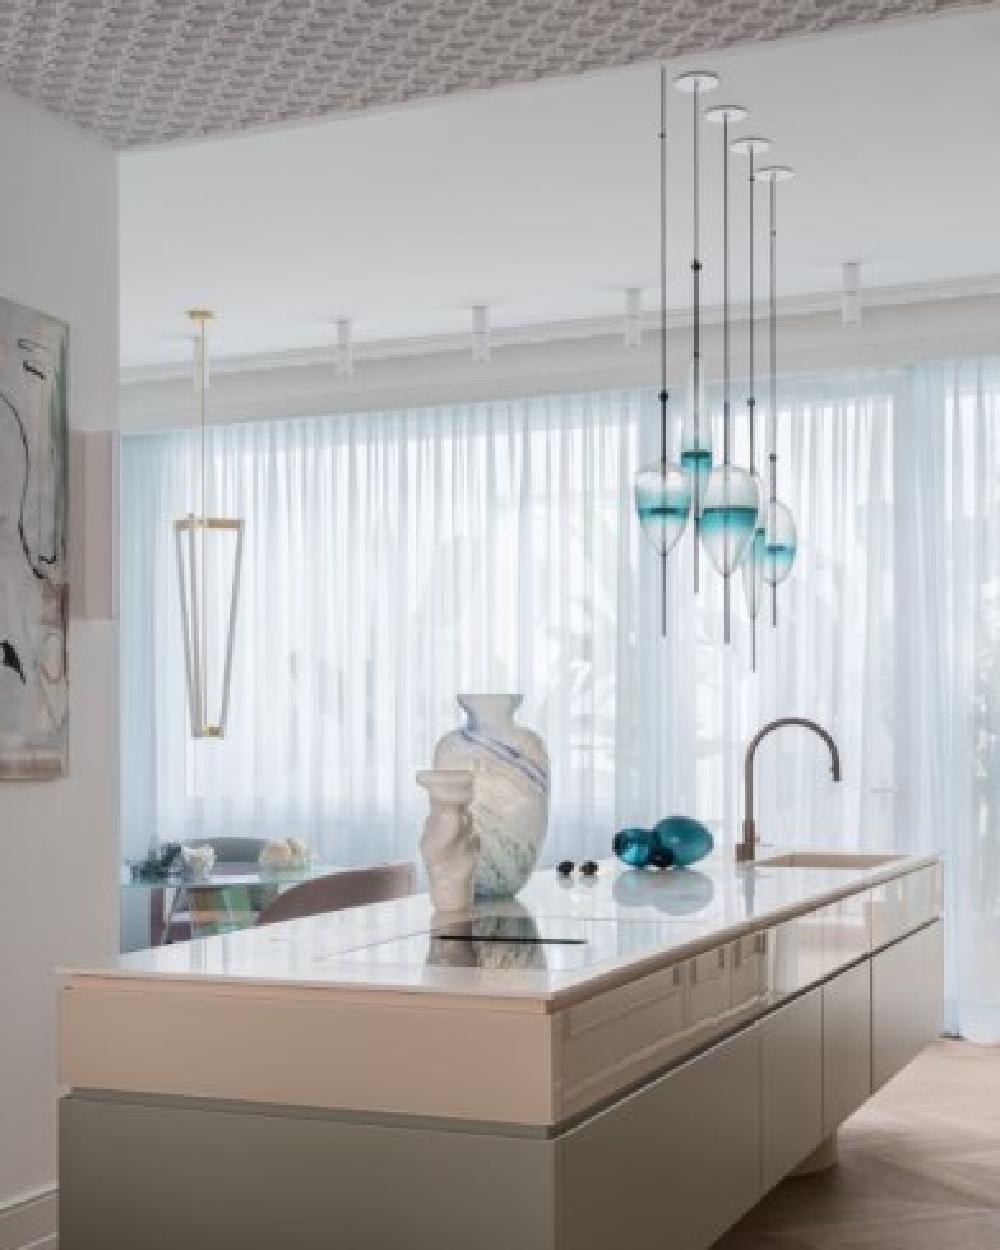 FLOW[T] S2 Pendant lamp in White by Nao Tamura for Wonderglass For Sale 1